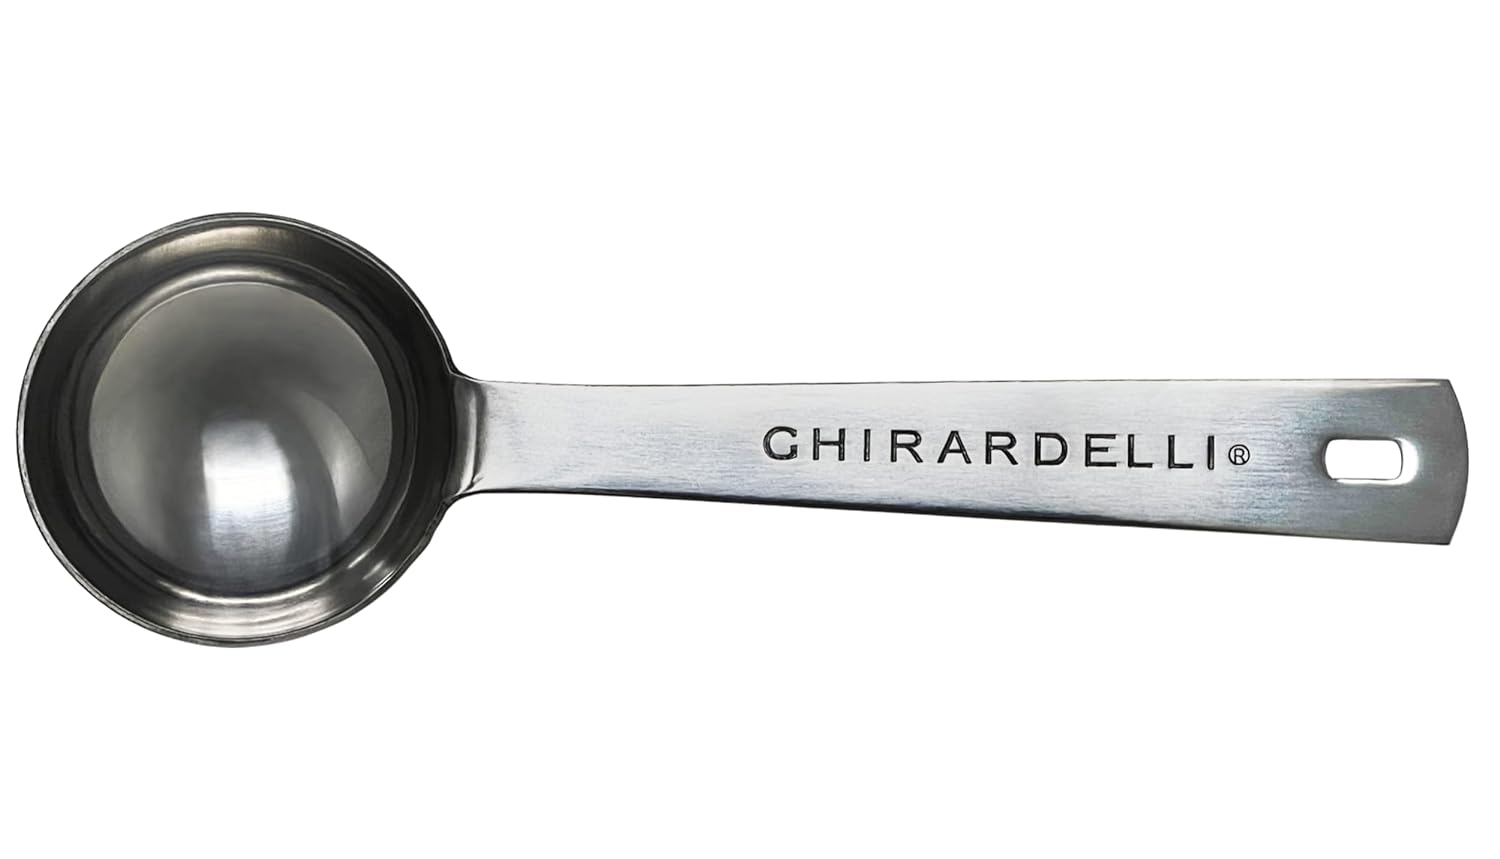 Ghirardelli Caramel and Chocolate Sauce 16 Ounce 1 of each Squeeze Bottle (Set of 2) with Ghirardelli Stamped Barista Spoon : Grocery & Gourmet Food